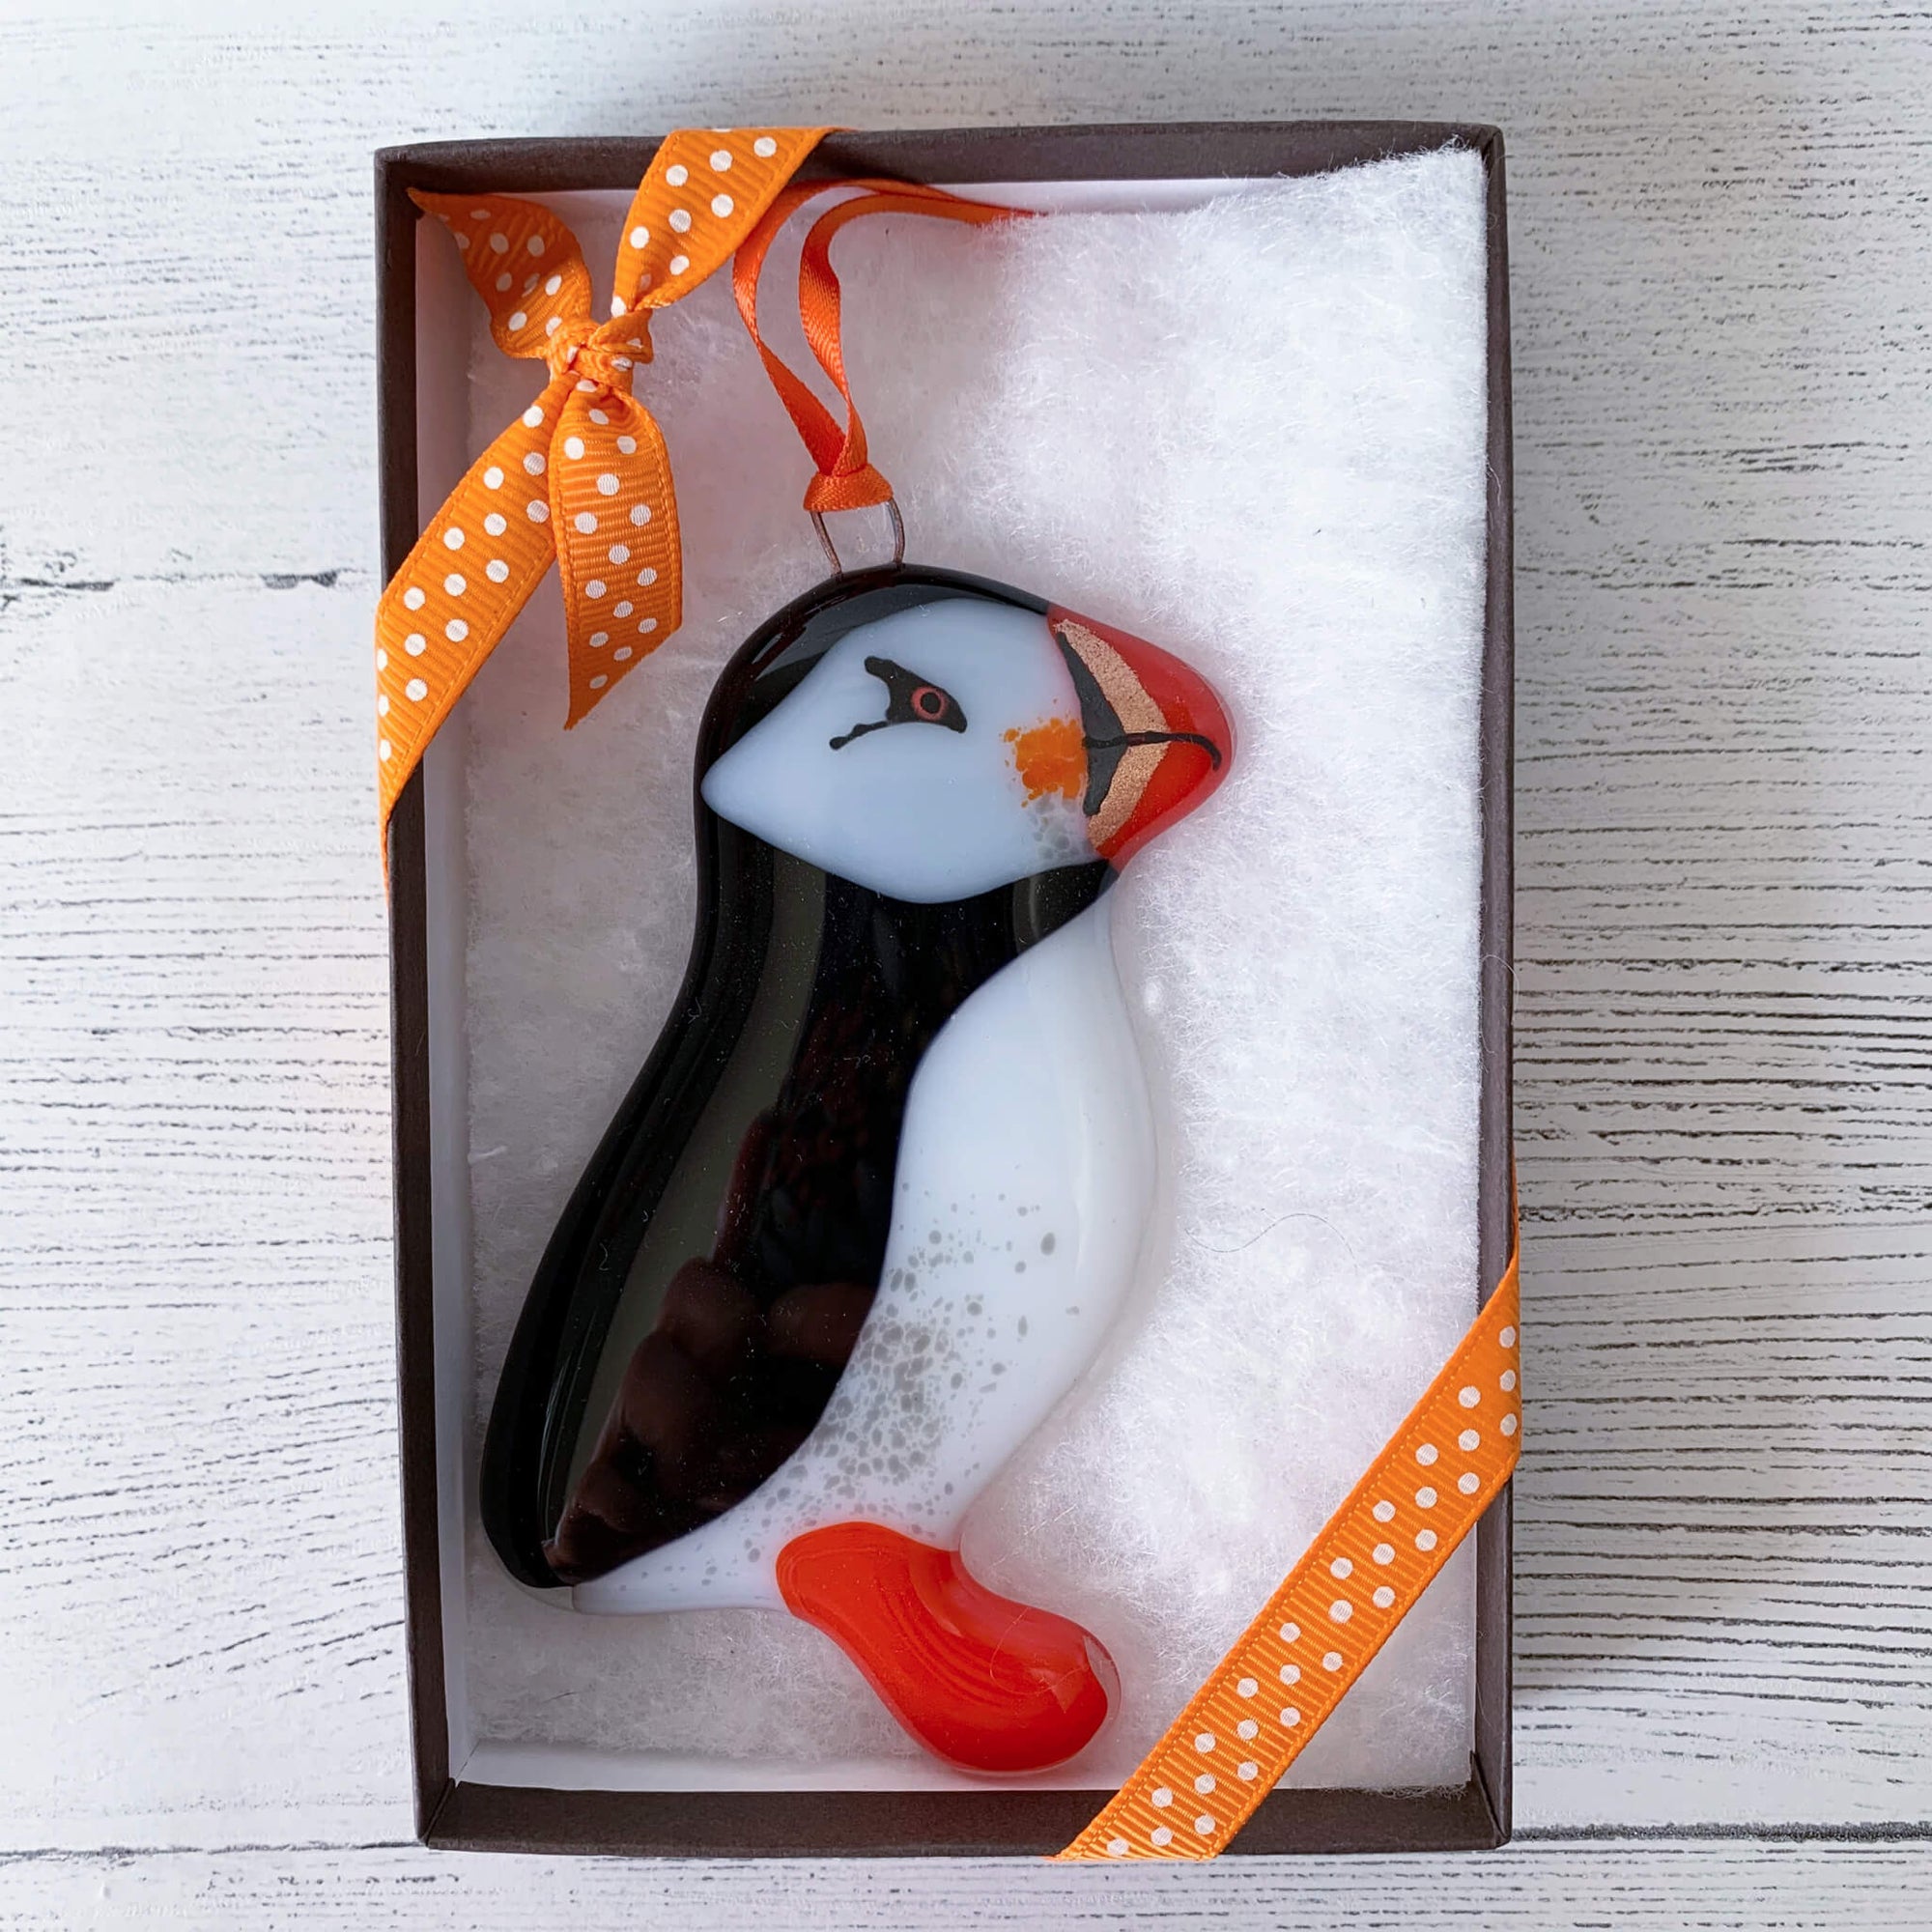 Handmade Boxed Fused Glass Puffin hanging, by Sarah Myatt. With orange spotted ribbon on box.